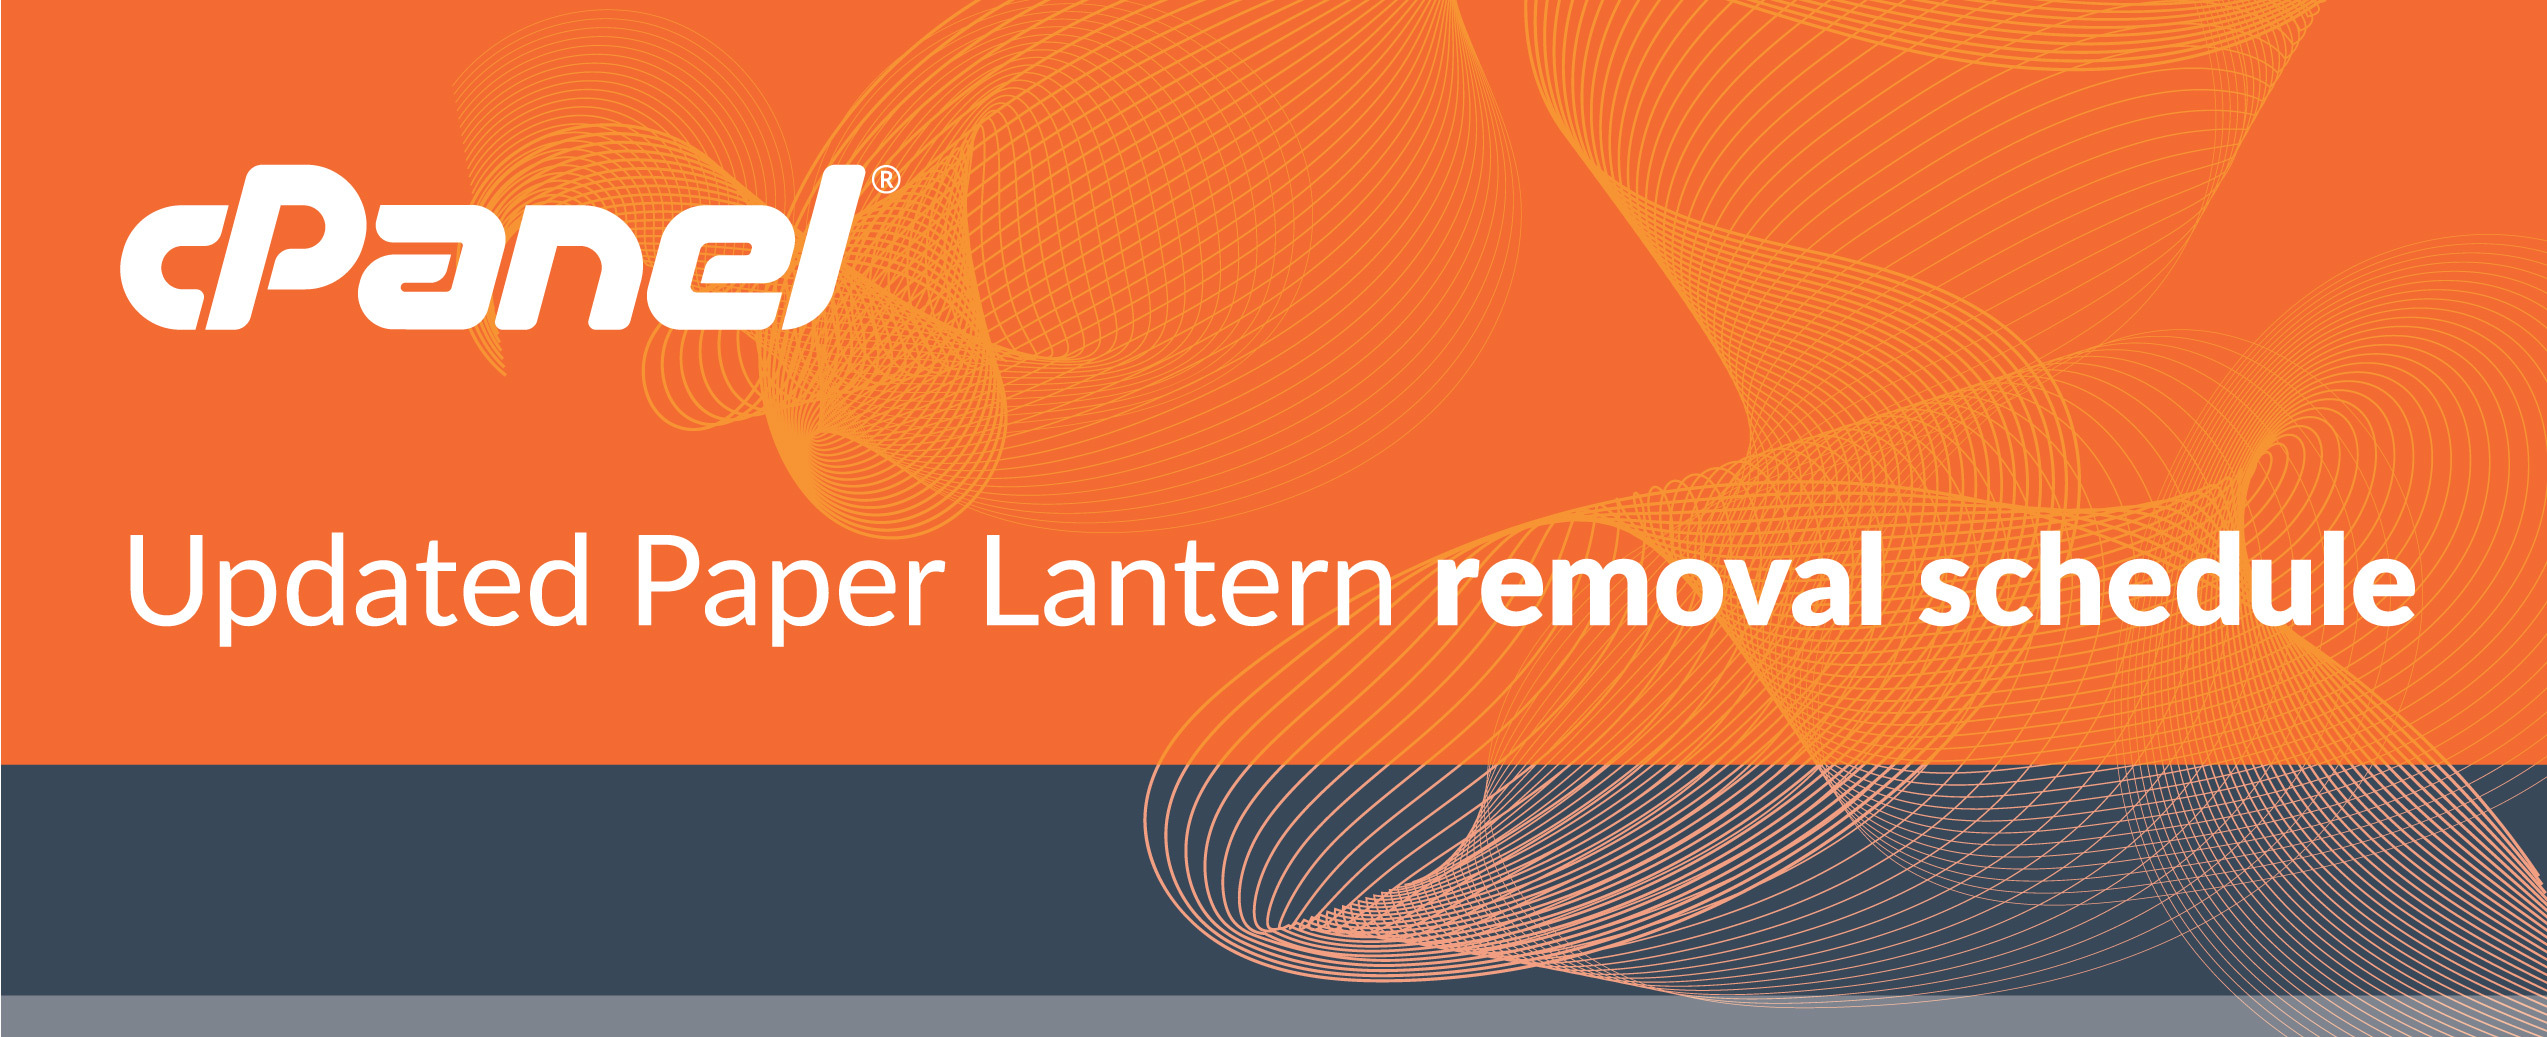 Updated Paper Lantern Removal Schedule